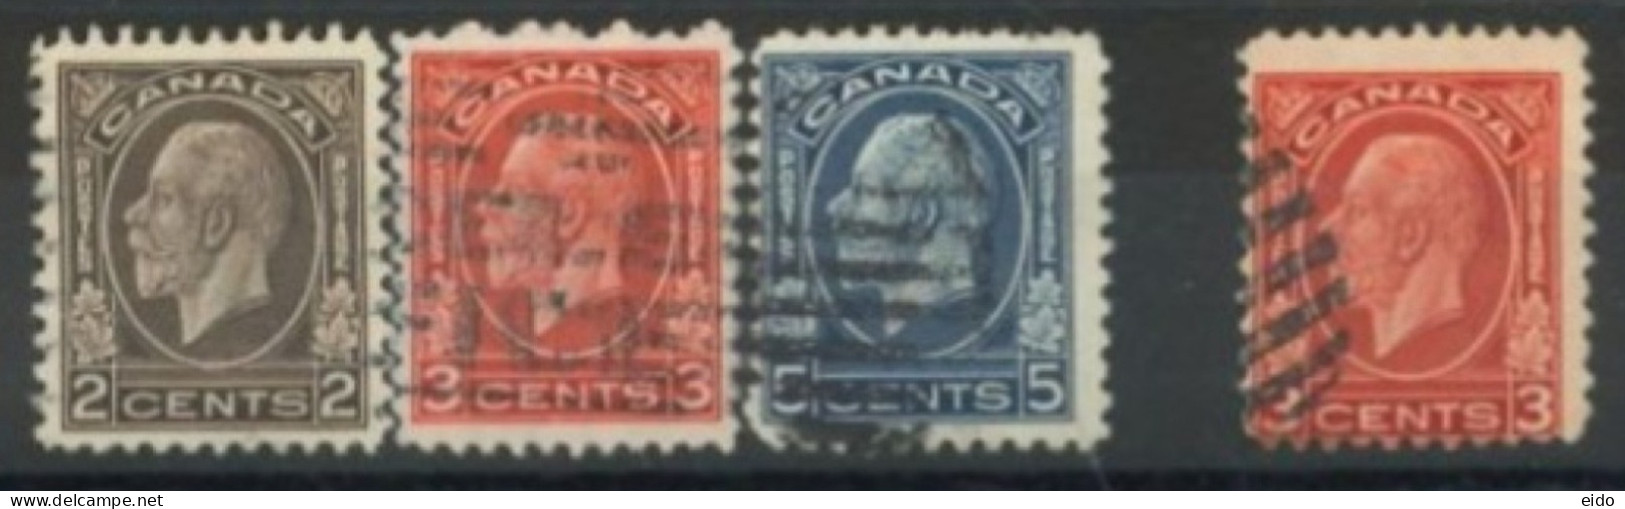 CANADA - 1932, KING GEORGE V STAMPS SET OF 4, USED. - Gebraucht